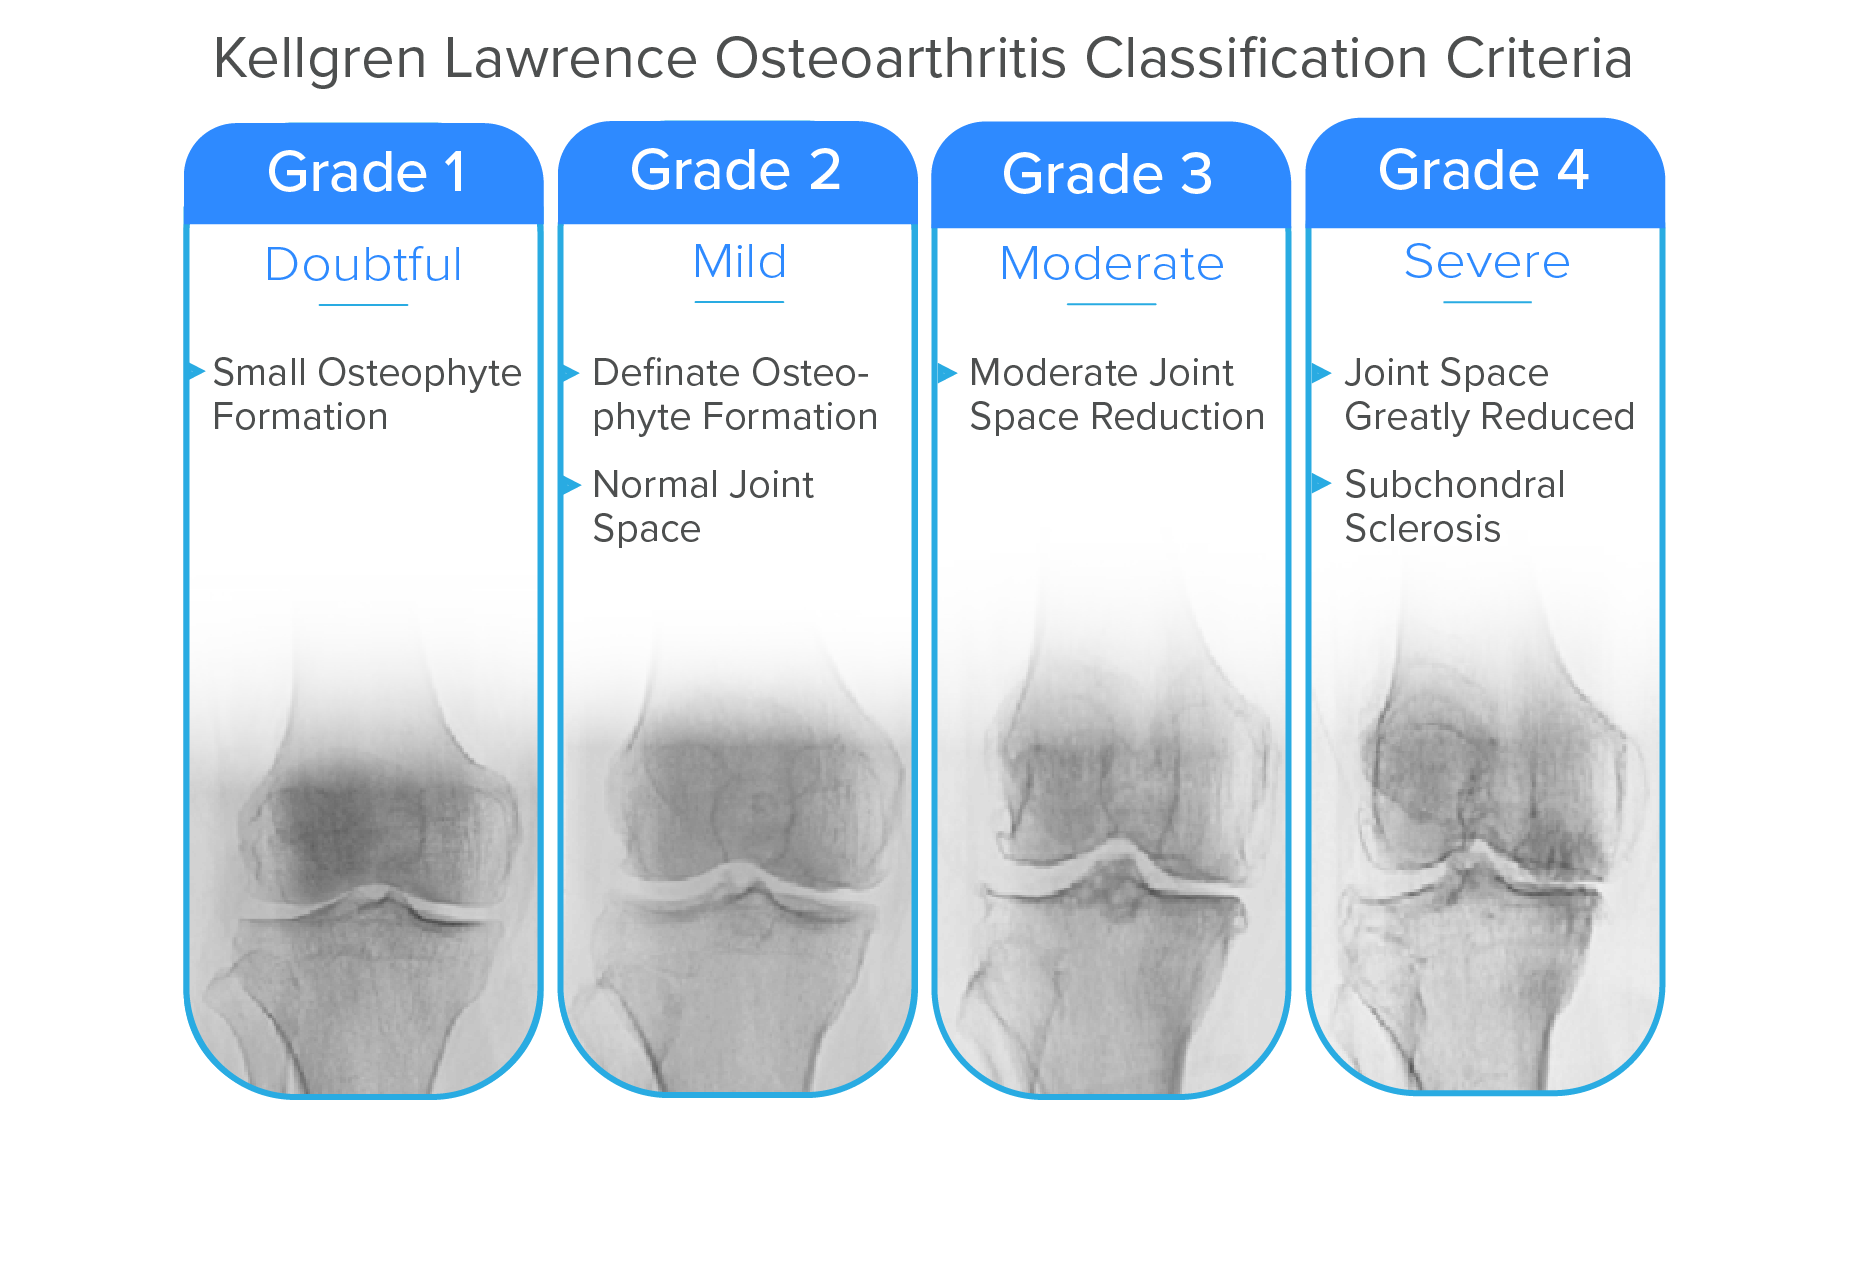 Clinical effects of multimodal therapy in patients with knee osteoarthritis.